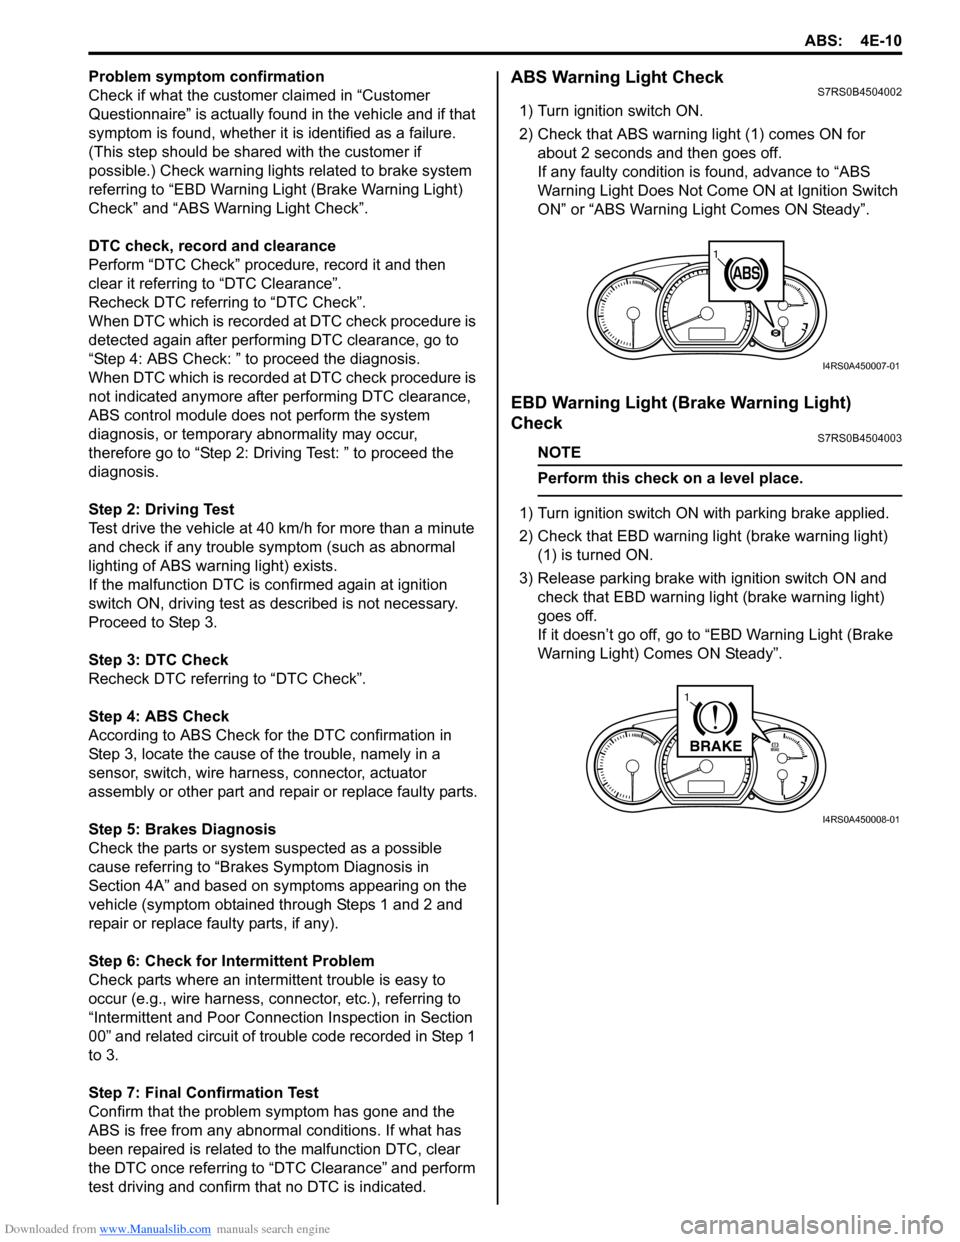 SUZUKI SWIFT 2008 2.G Service Workshop Manual Downloaded from www.Manualslib.com manuals search engine ABS: 4E-10
Problem symptom confirmation
Check if what the customer claimed in “Customer 
Questionnaire” is actually found in the vehicle an